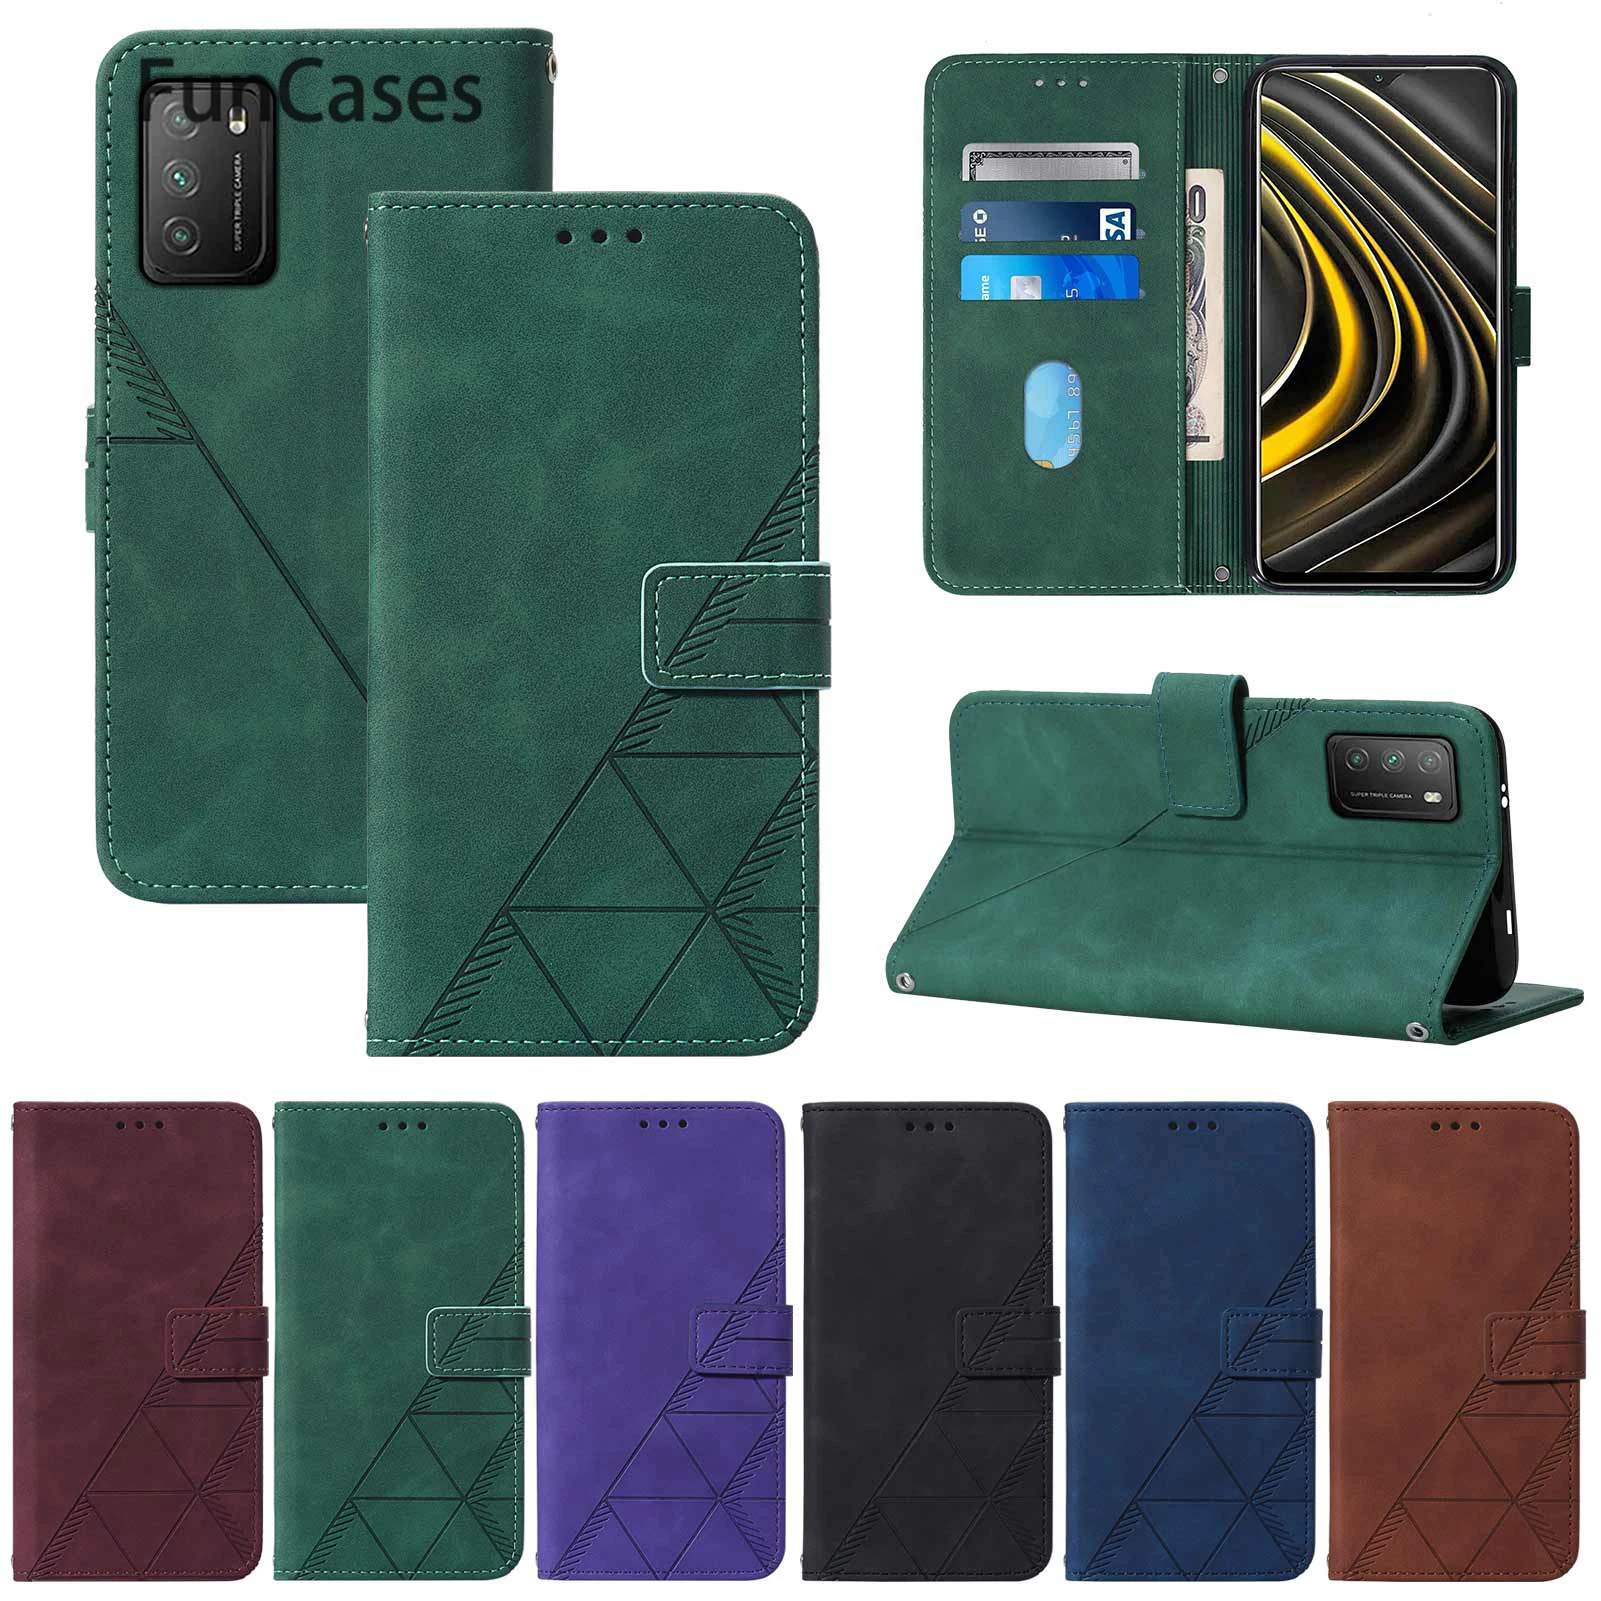 Hot Stands Feature Phone Pouch Bag For case POCO C3 Accessory Shell Etui sFor POCO carcaso X3 F3 M3 Pro NFC Telephone Covers